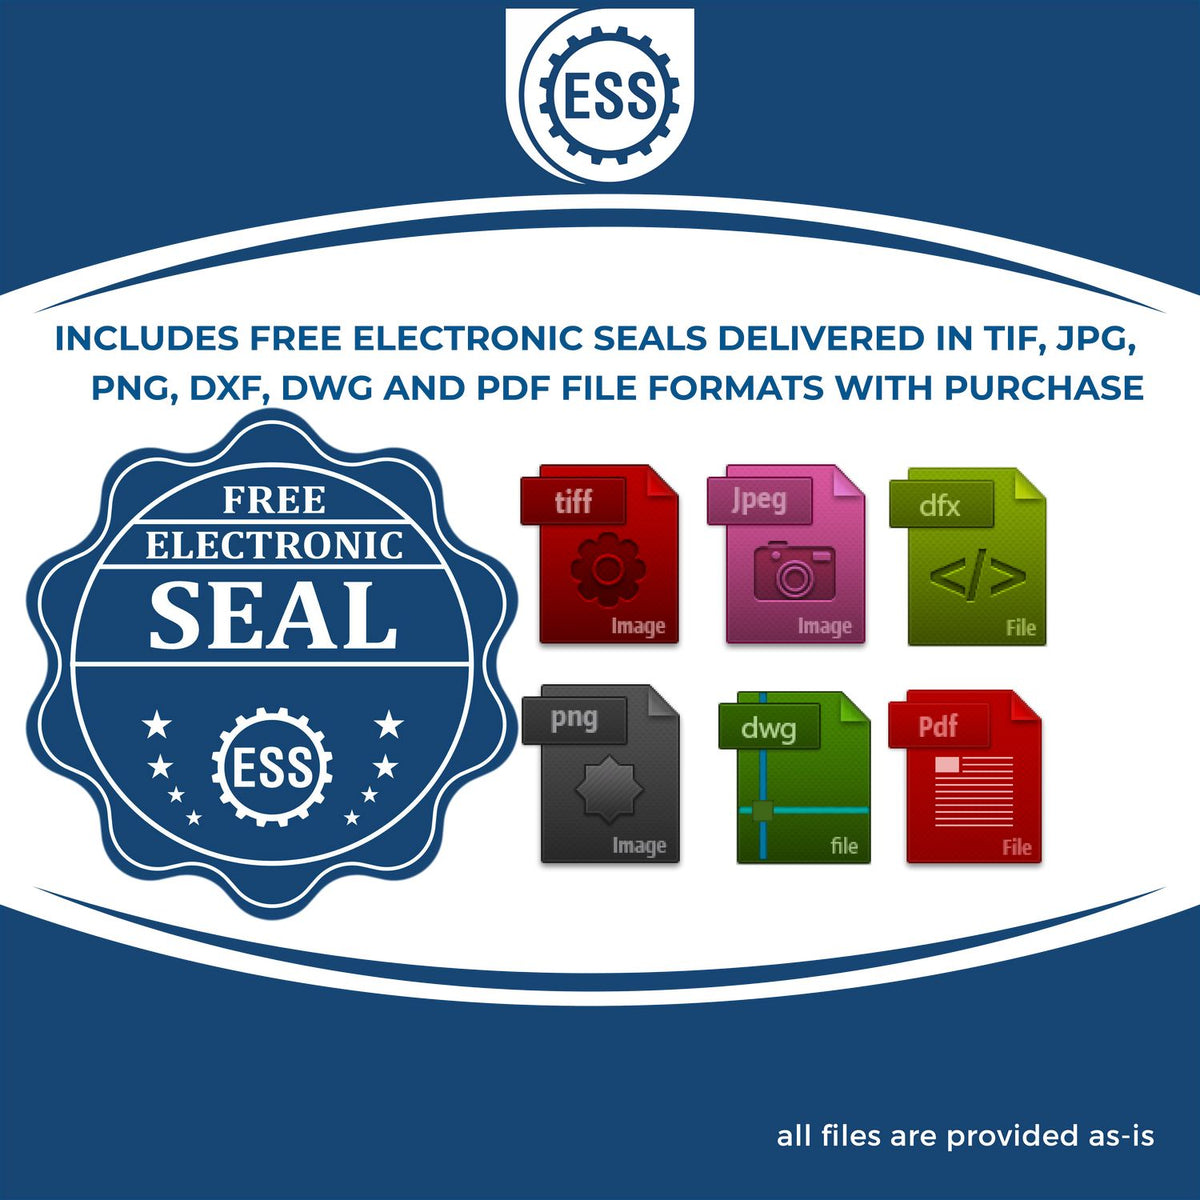 An infographic for the free electronic seal for the Hybrid North Dakota Land Surveyor Seal illustrating the different file type icons such as DXF, DWG, TIF, JPG and PNG.